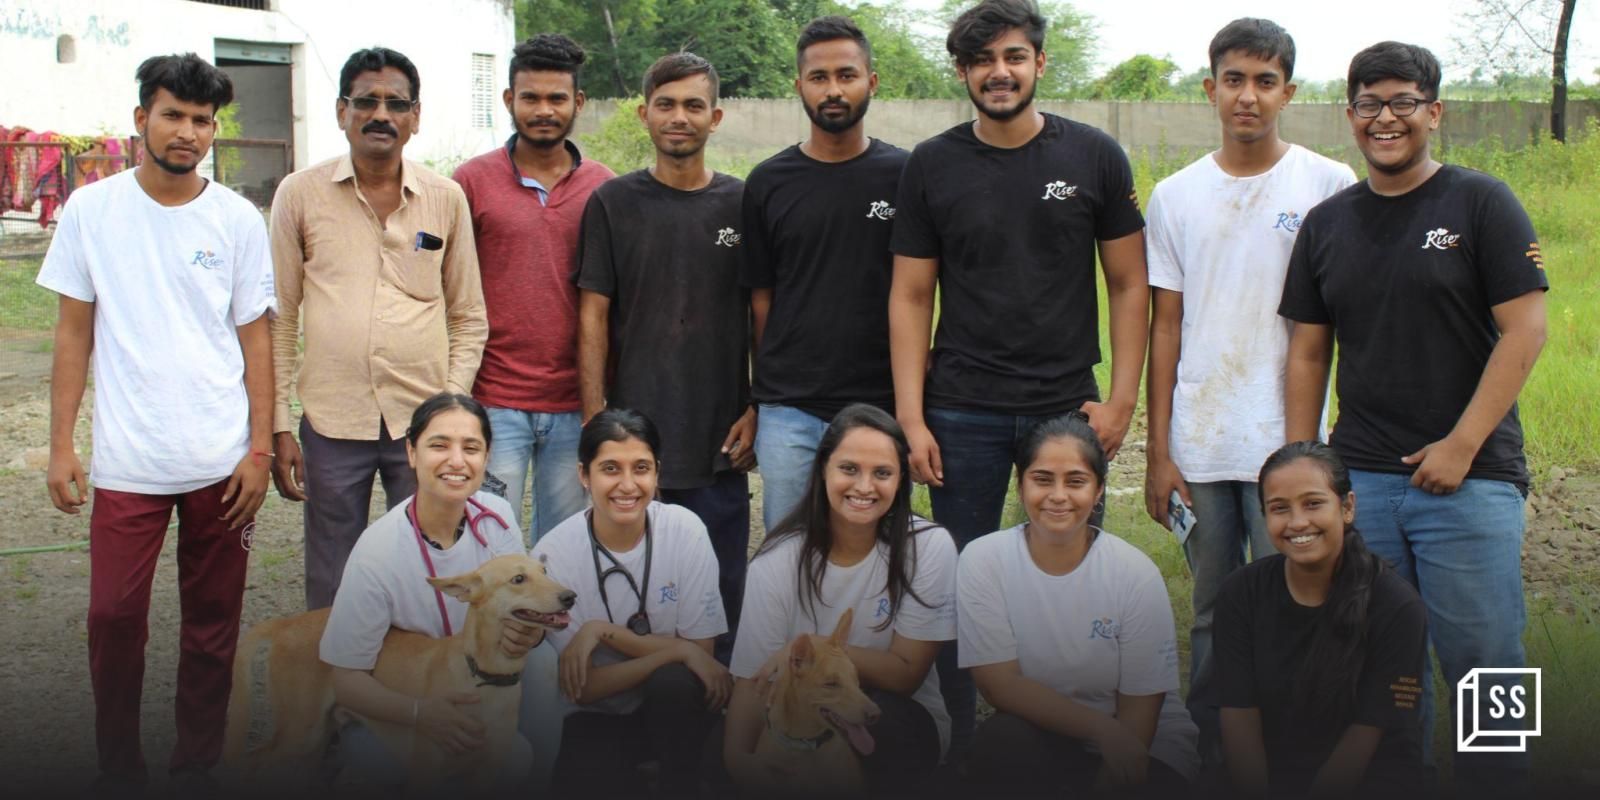 Inside Nagpur’s Rise for Tails: a rehabilitation home for 3,000 stray animals